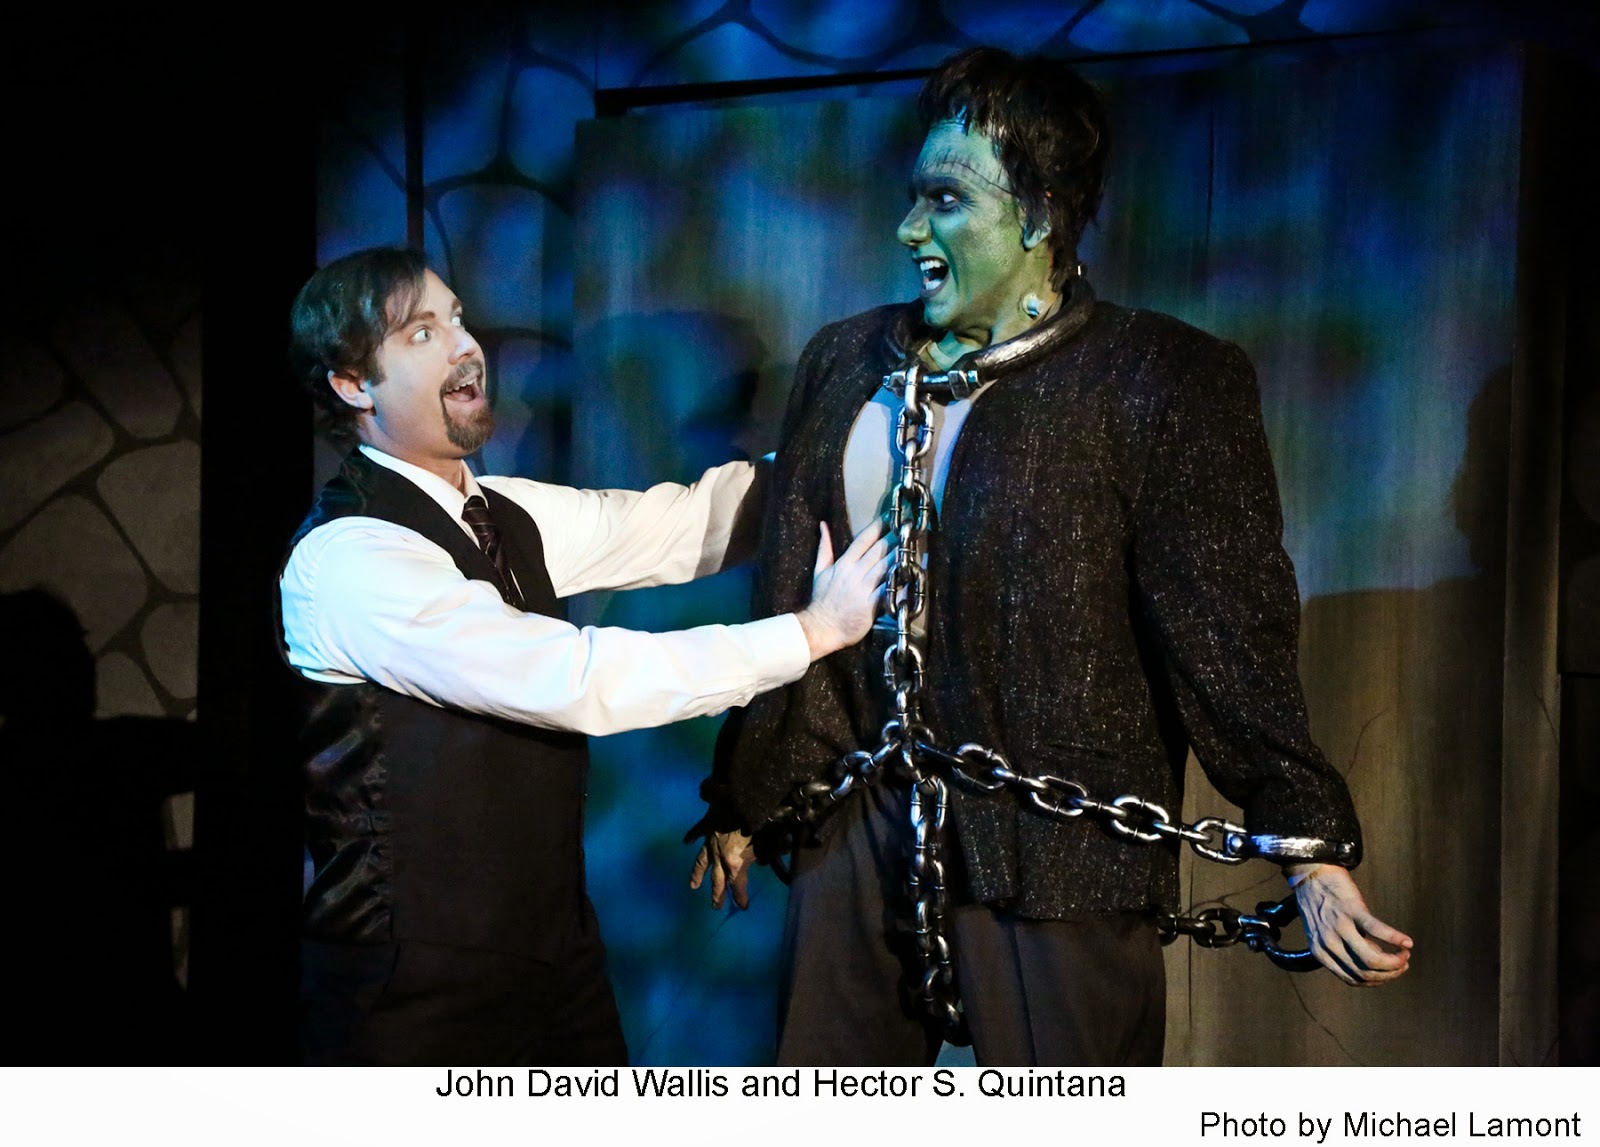 Young Frankenstein review – glorious gags as Mel Brooks bolts together a  monster hit, Musicals